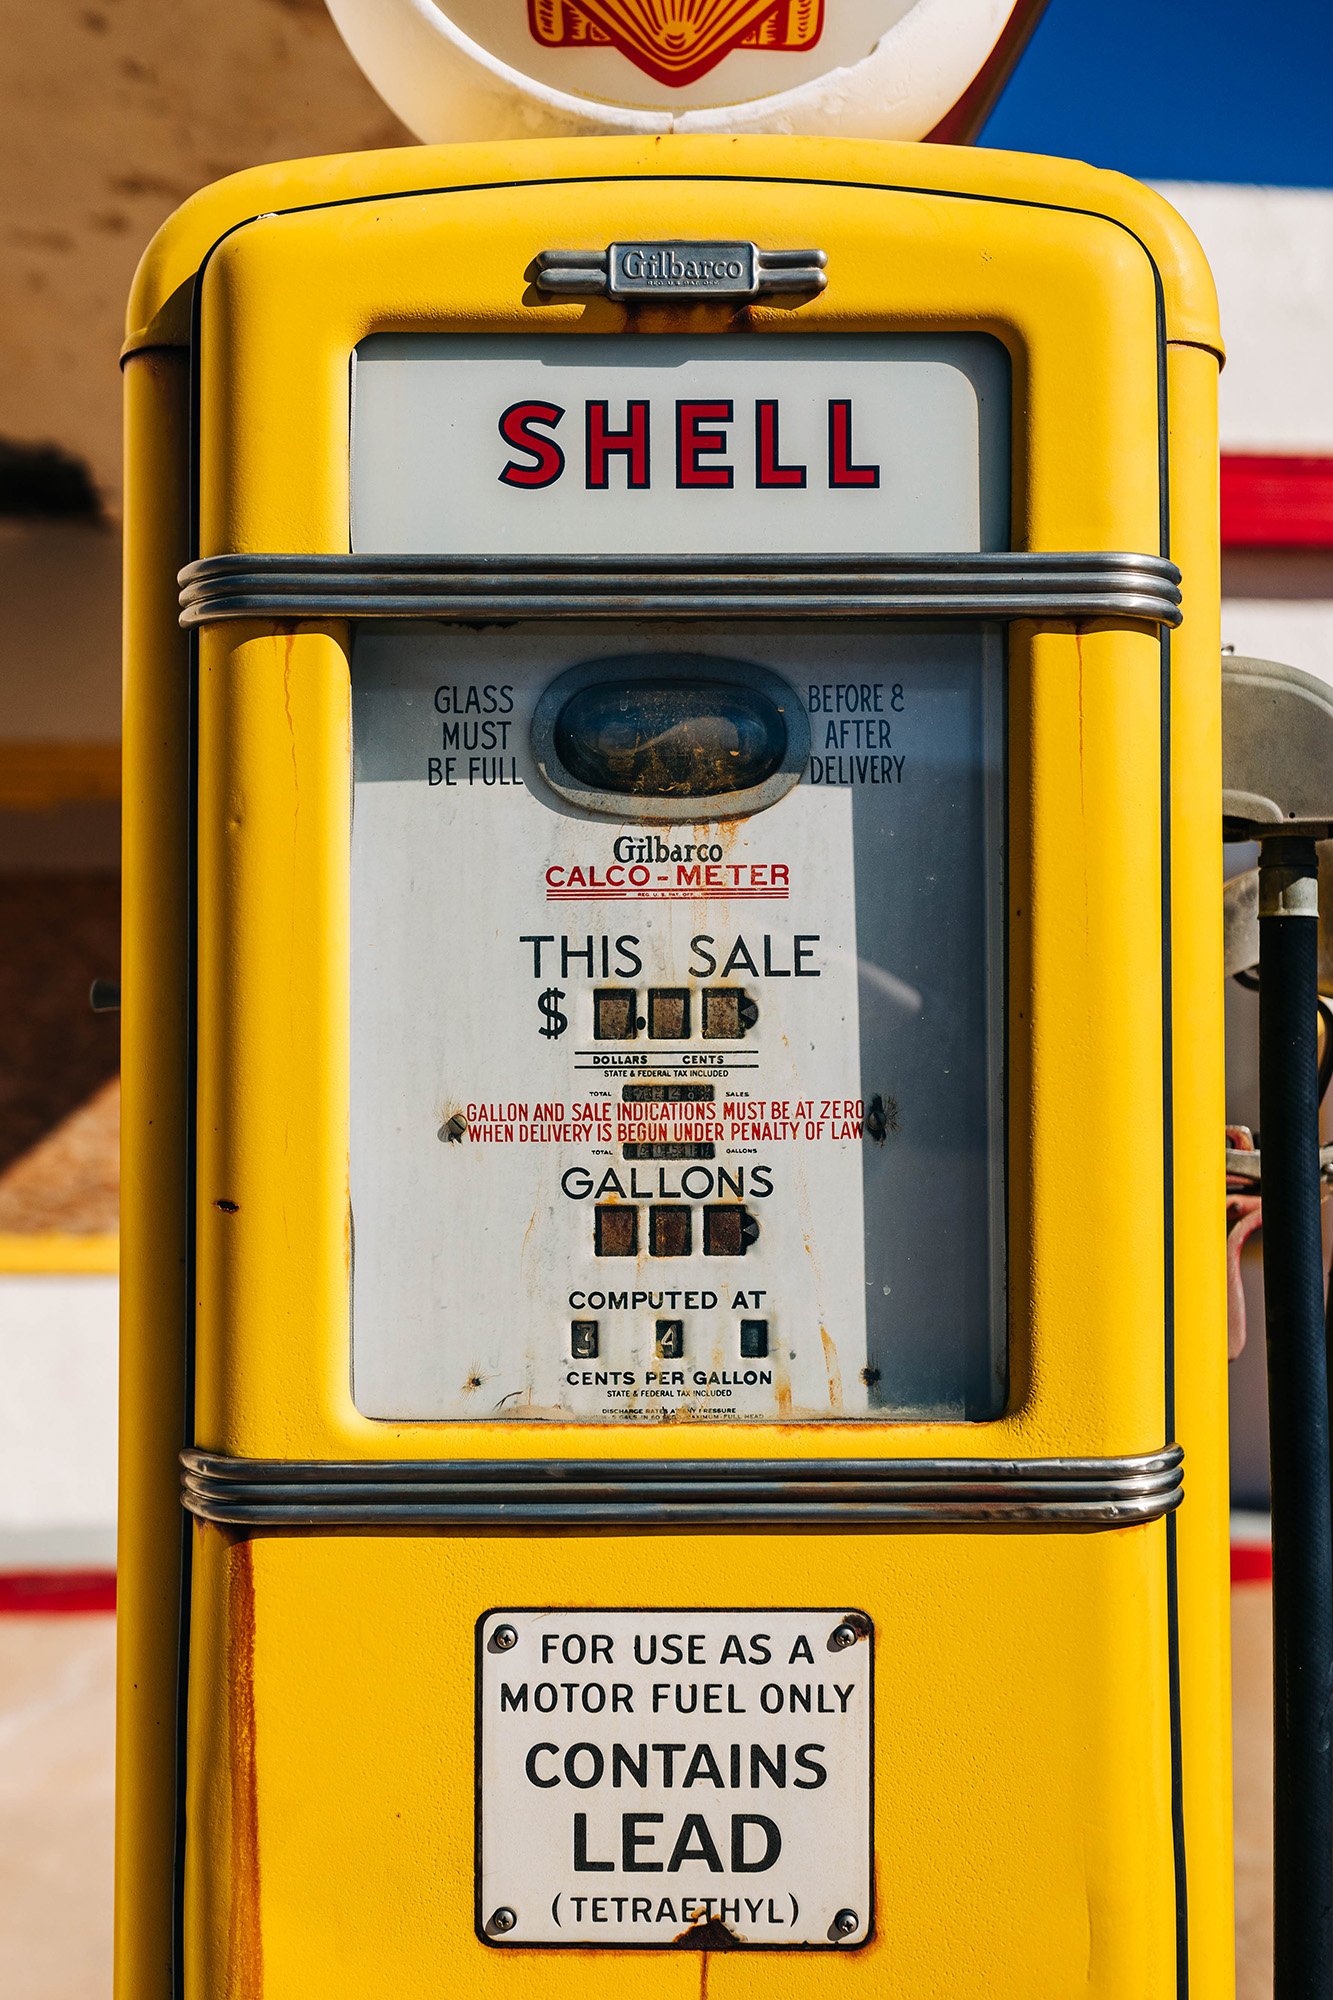 A retro Shell station in the historic area of Bisbee, Arizona.